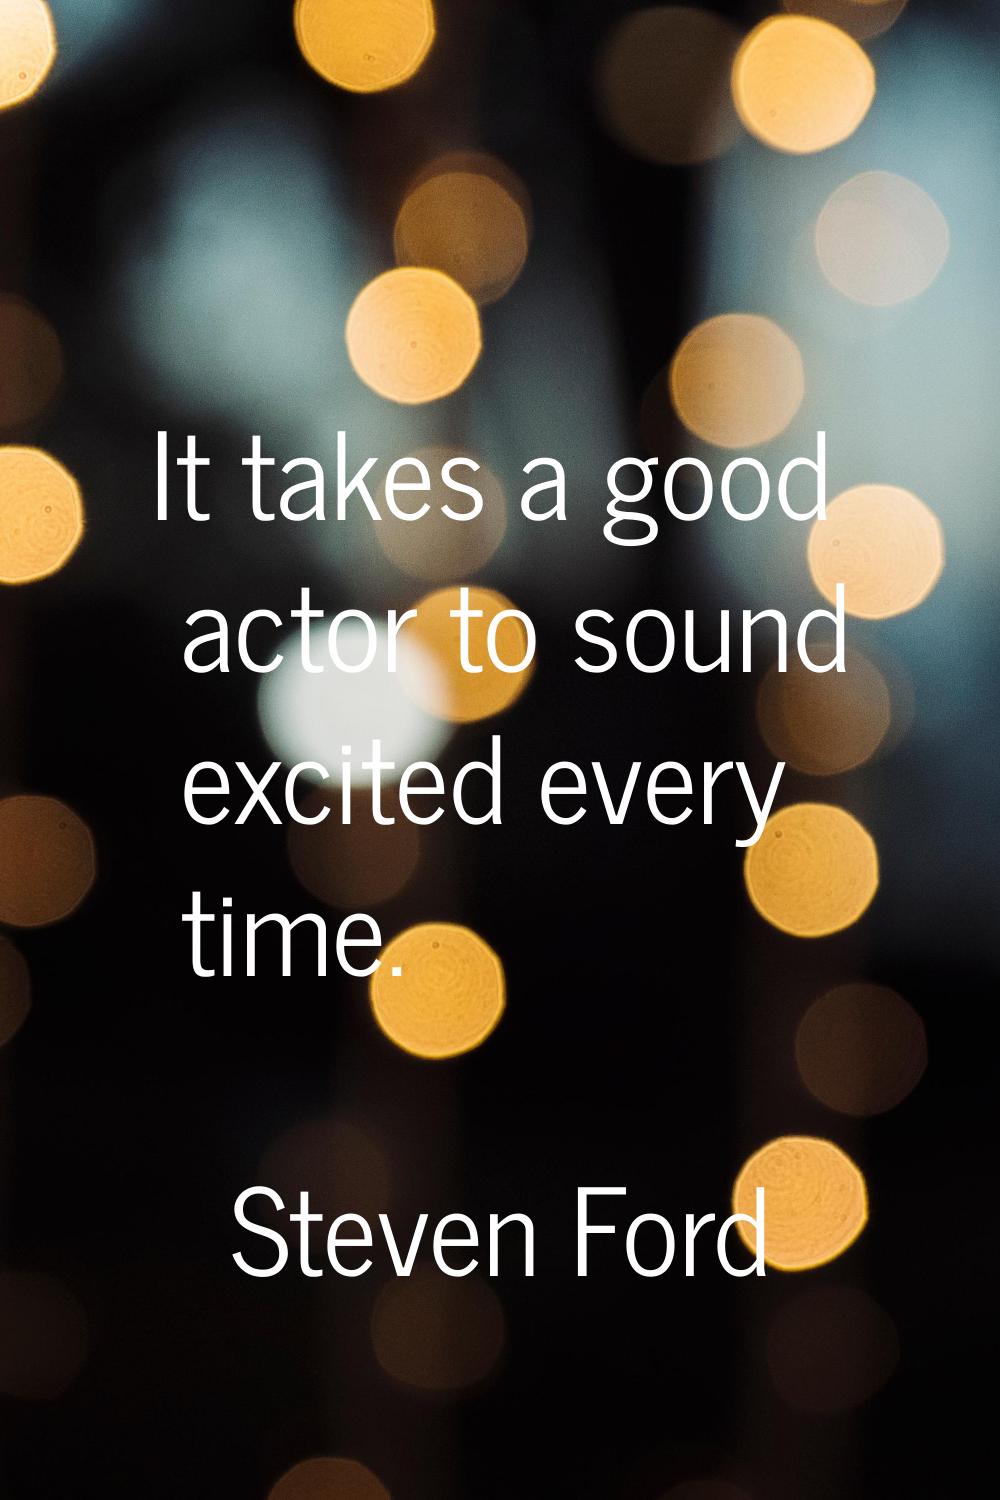 It takes a good actor to sound excited every time.